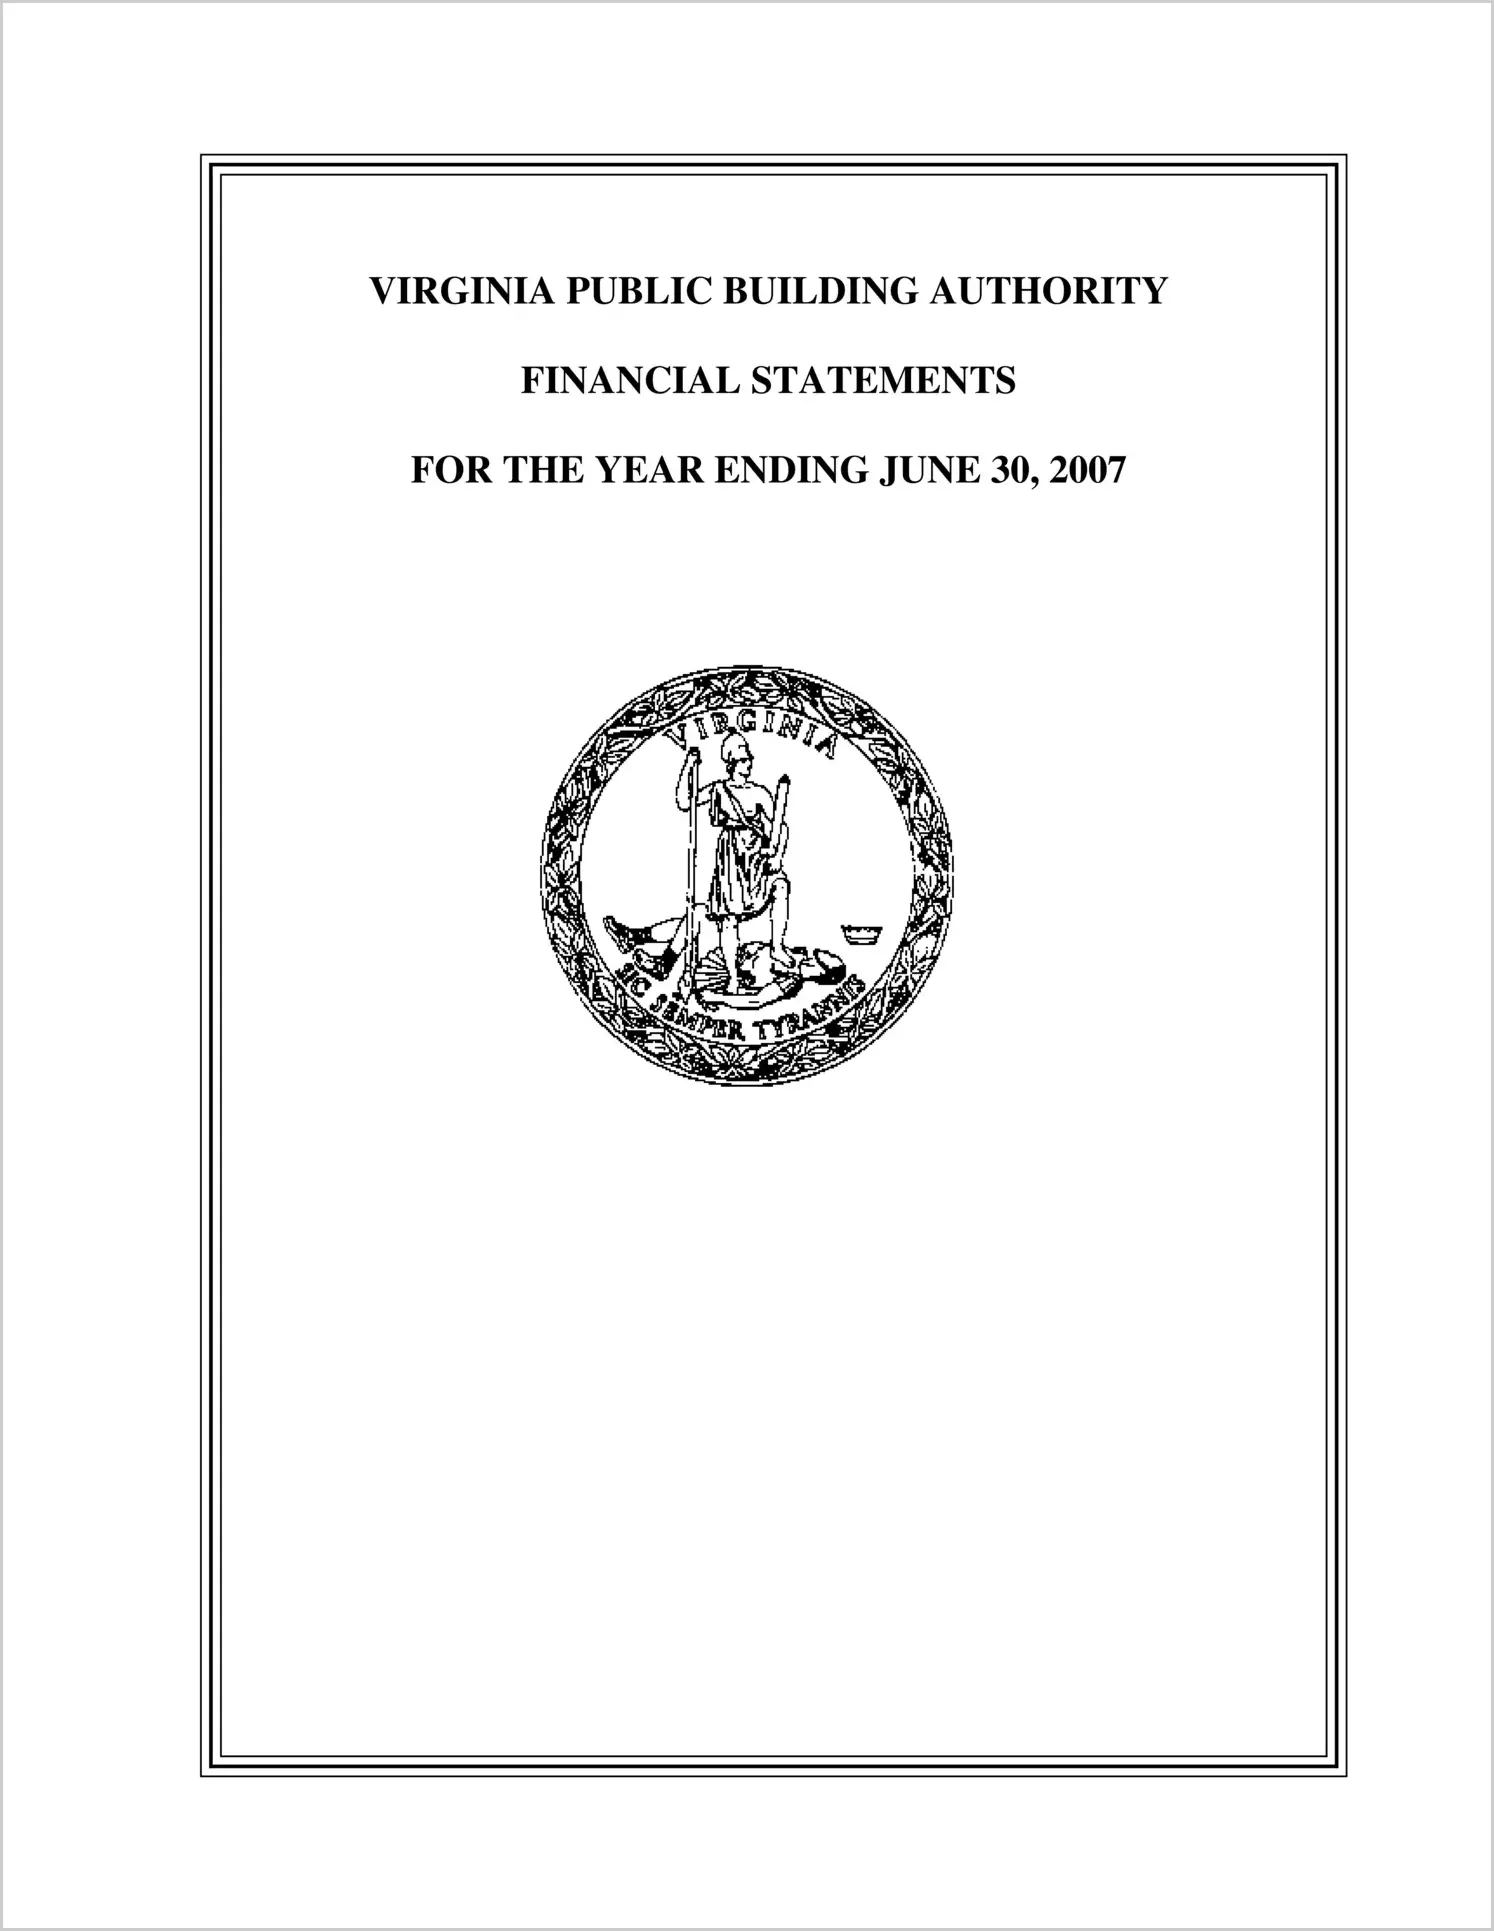 Virginia Public Building Authority Financial Statements for the year ended June 30, 2007